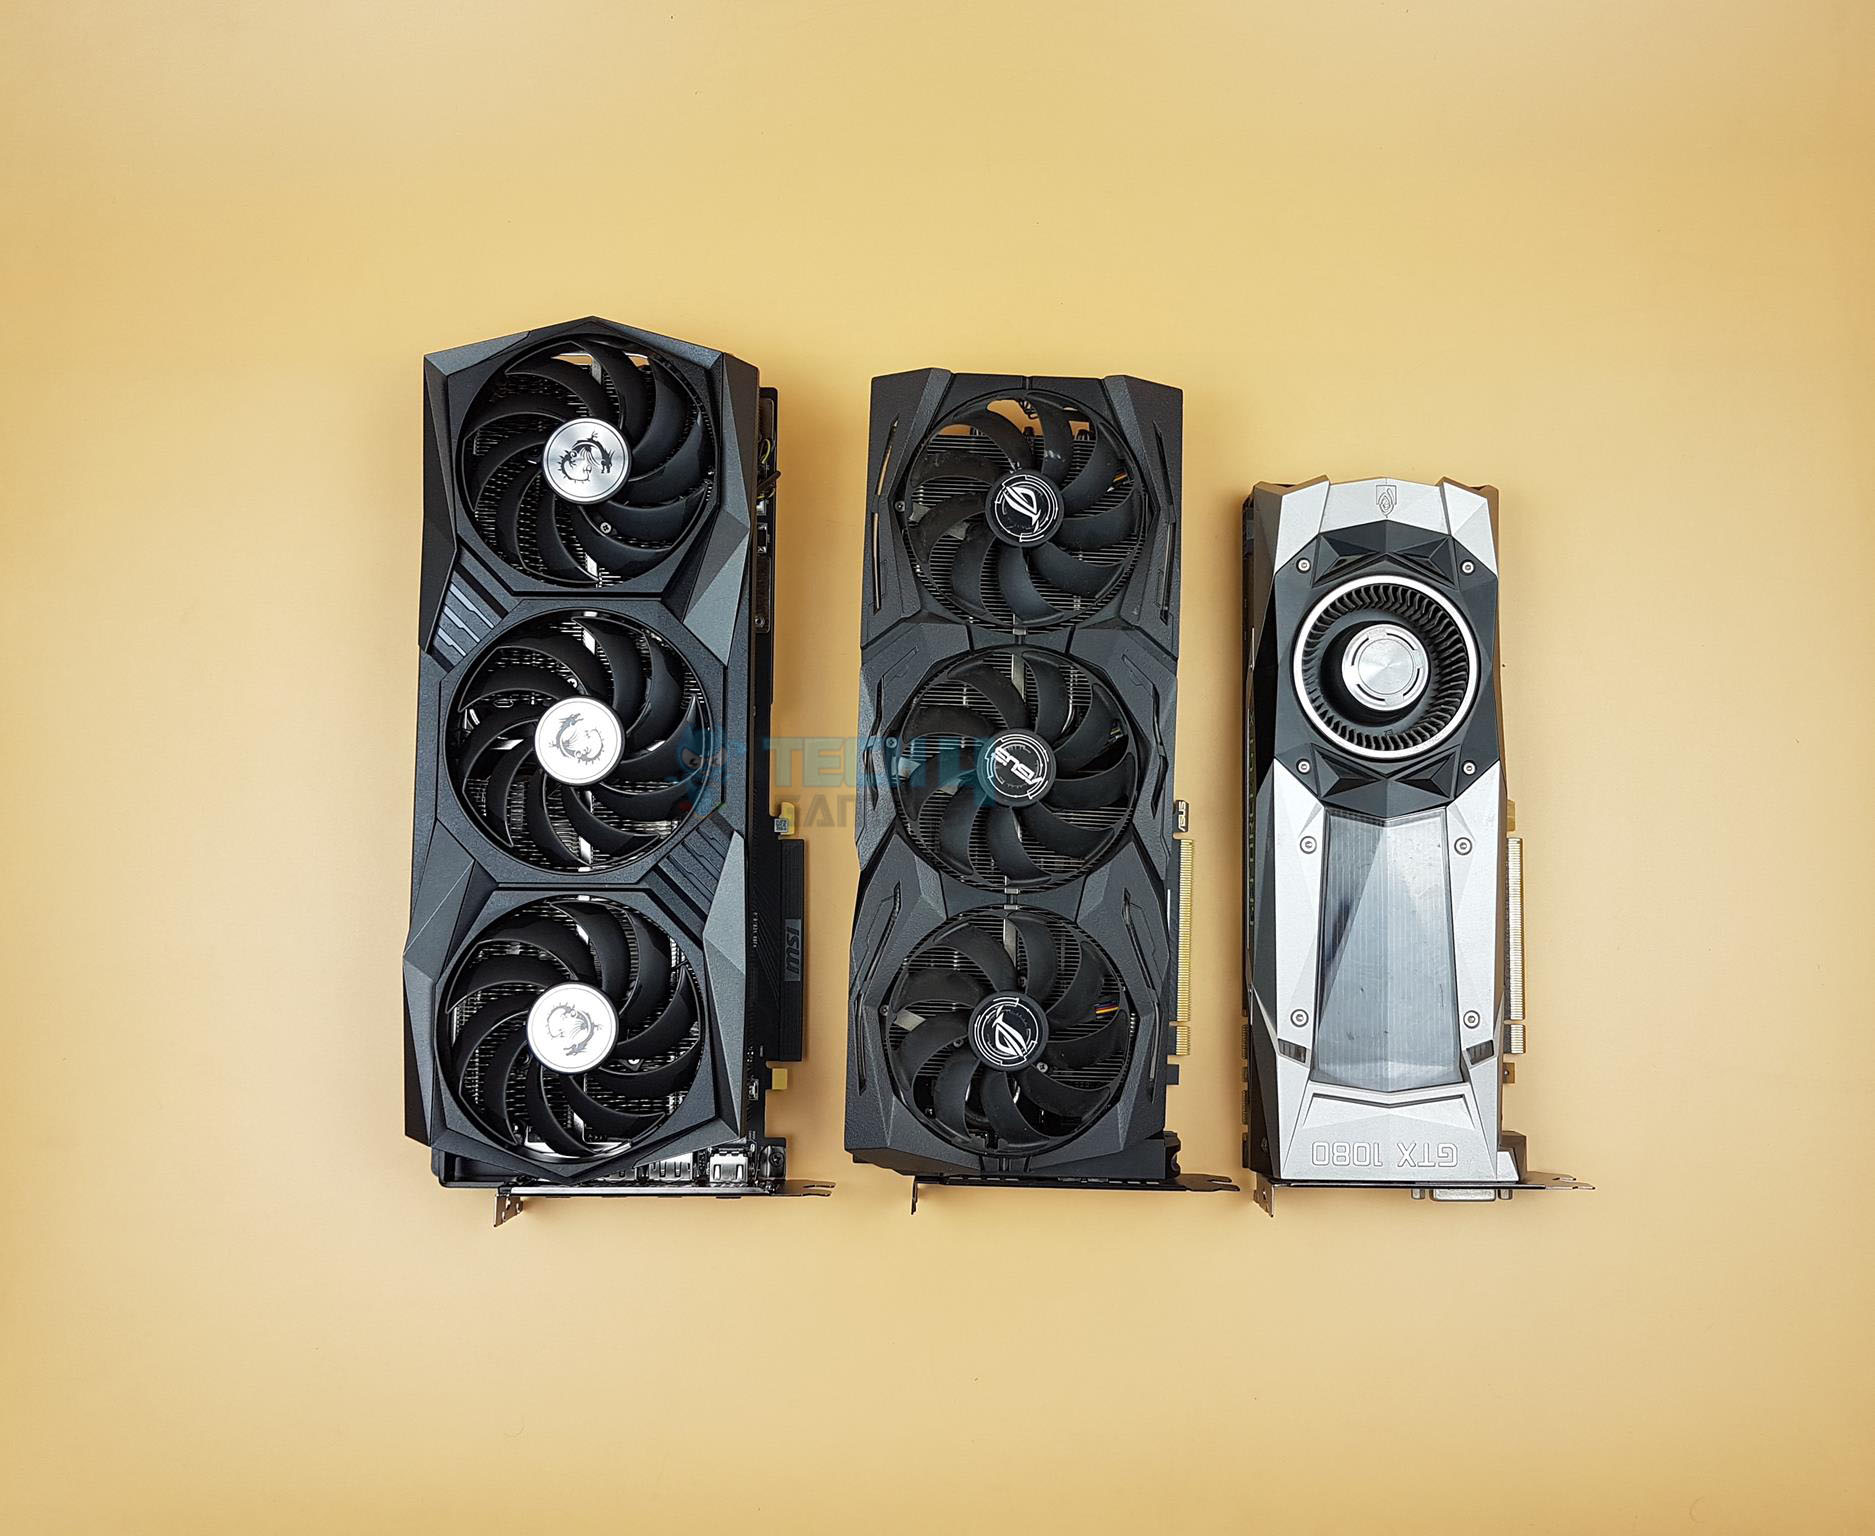 MSI GeForce RTX 3090 Gaming X Trio Graphics Card Review 2022